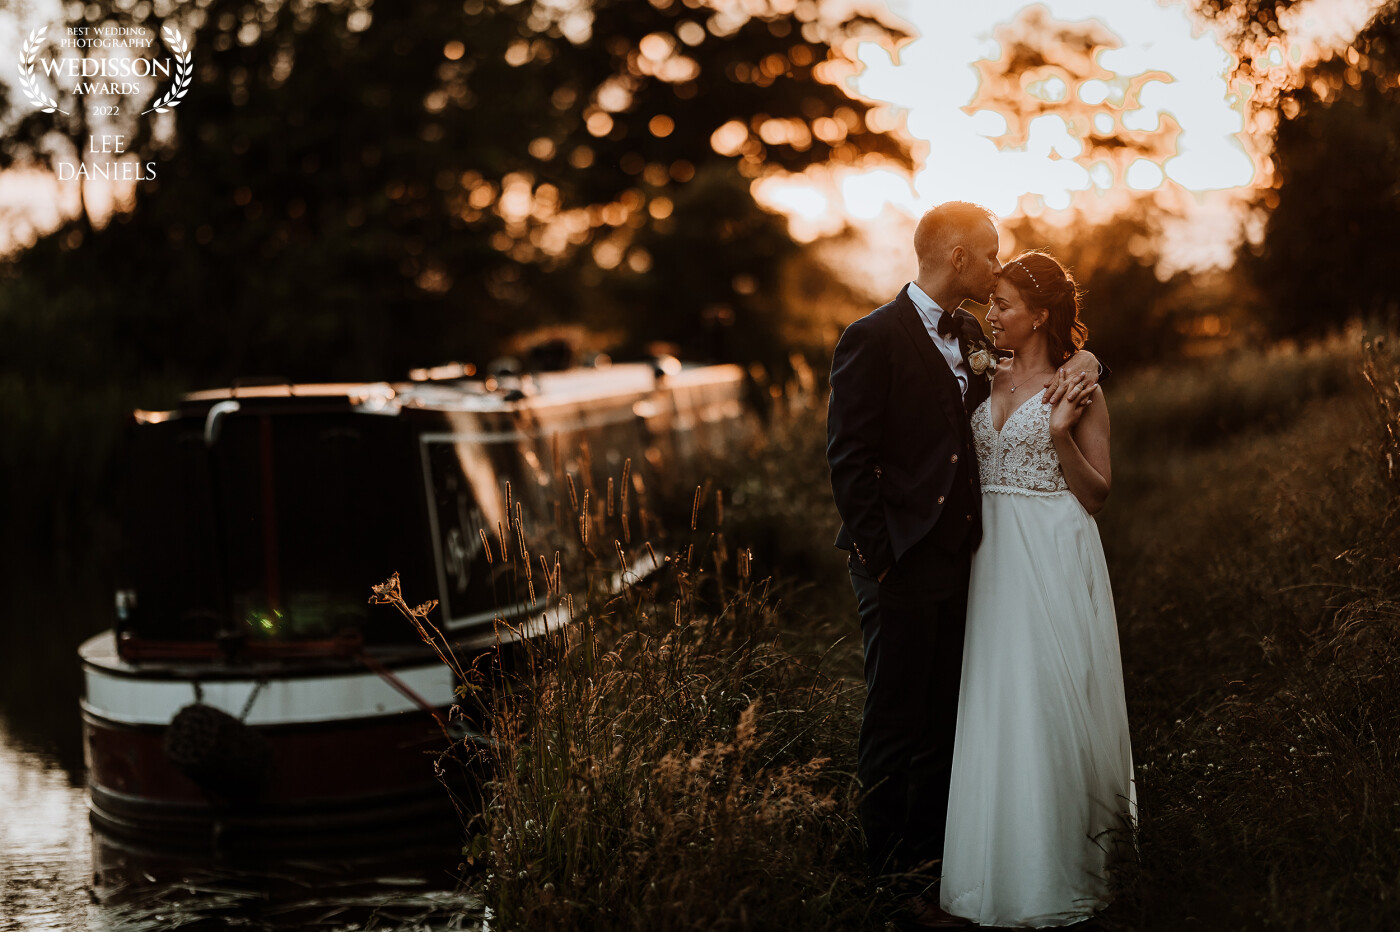 A sunset stroll by the canal. Lizzie & James had a very relaxed wedding day vibe, which meant there was plenty of time for couples portraits in the evening, just the most perfect evening